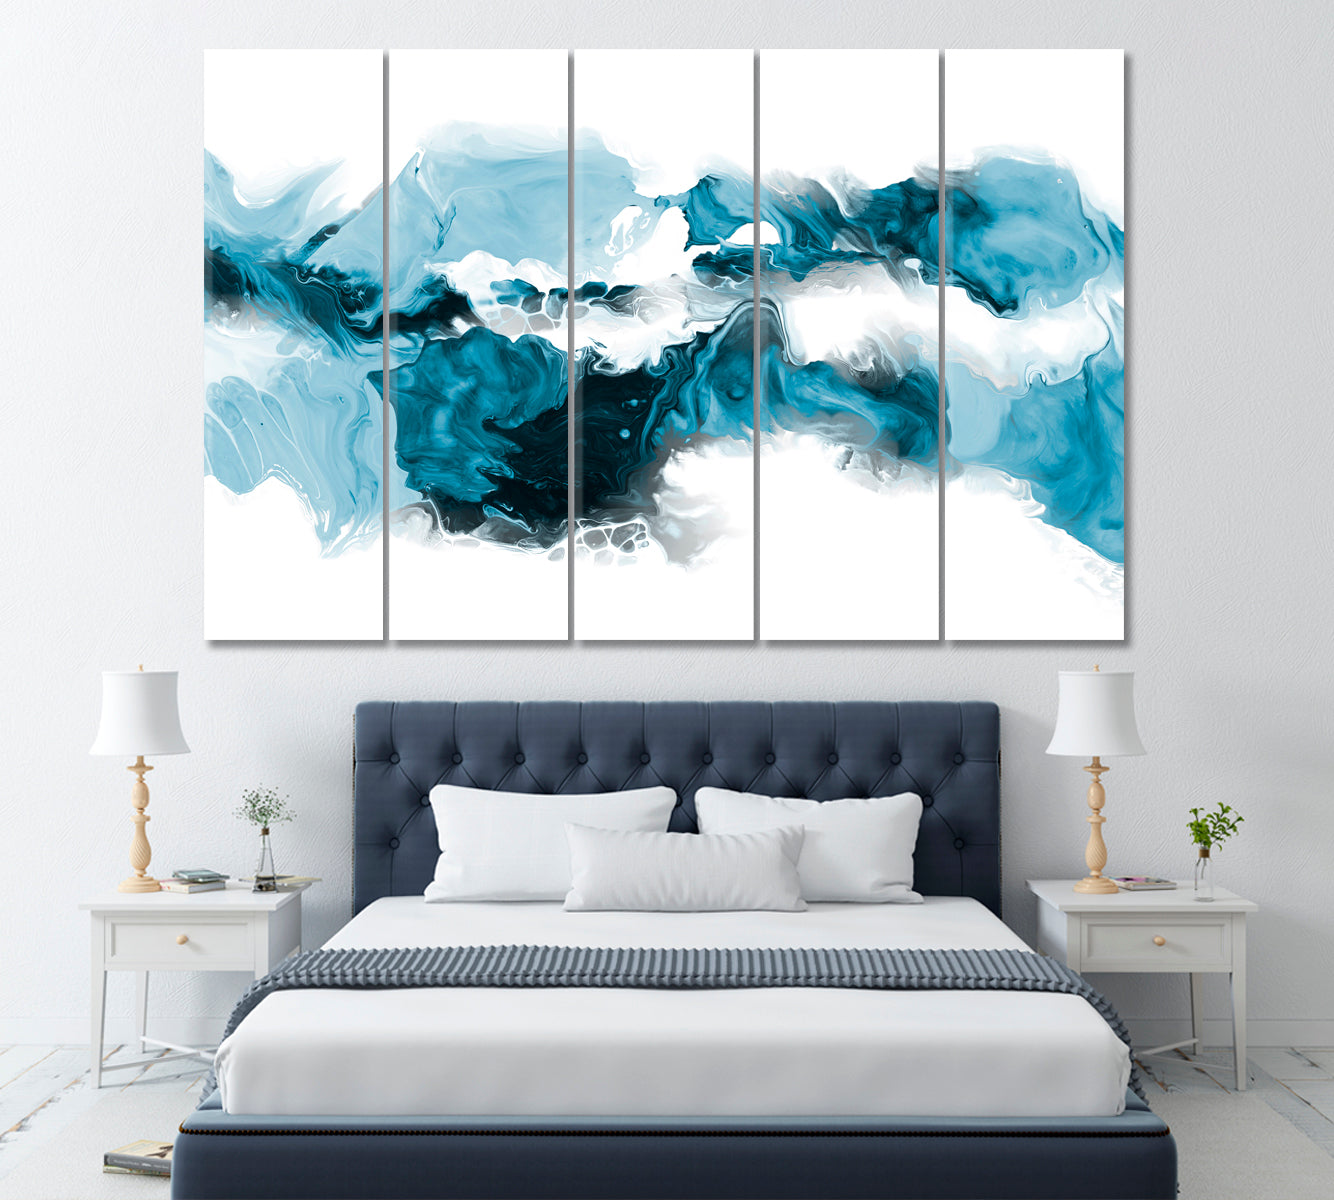 Blue Marble Abstract Splash Canvas Print ArtLexy 5 Panels 36"x24" inches 